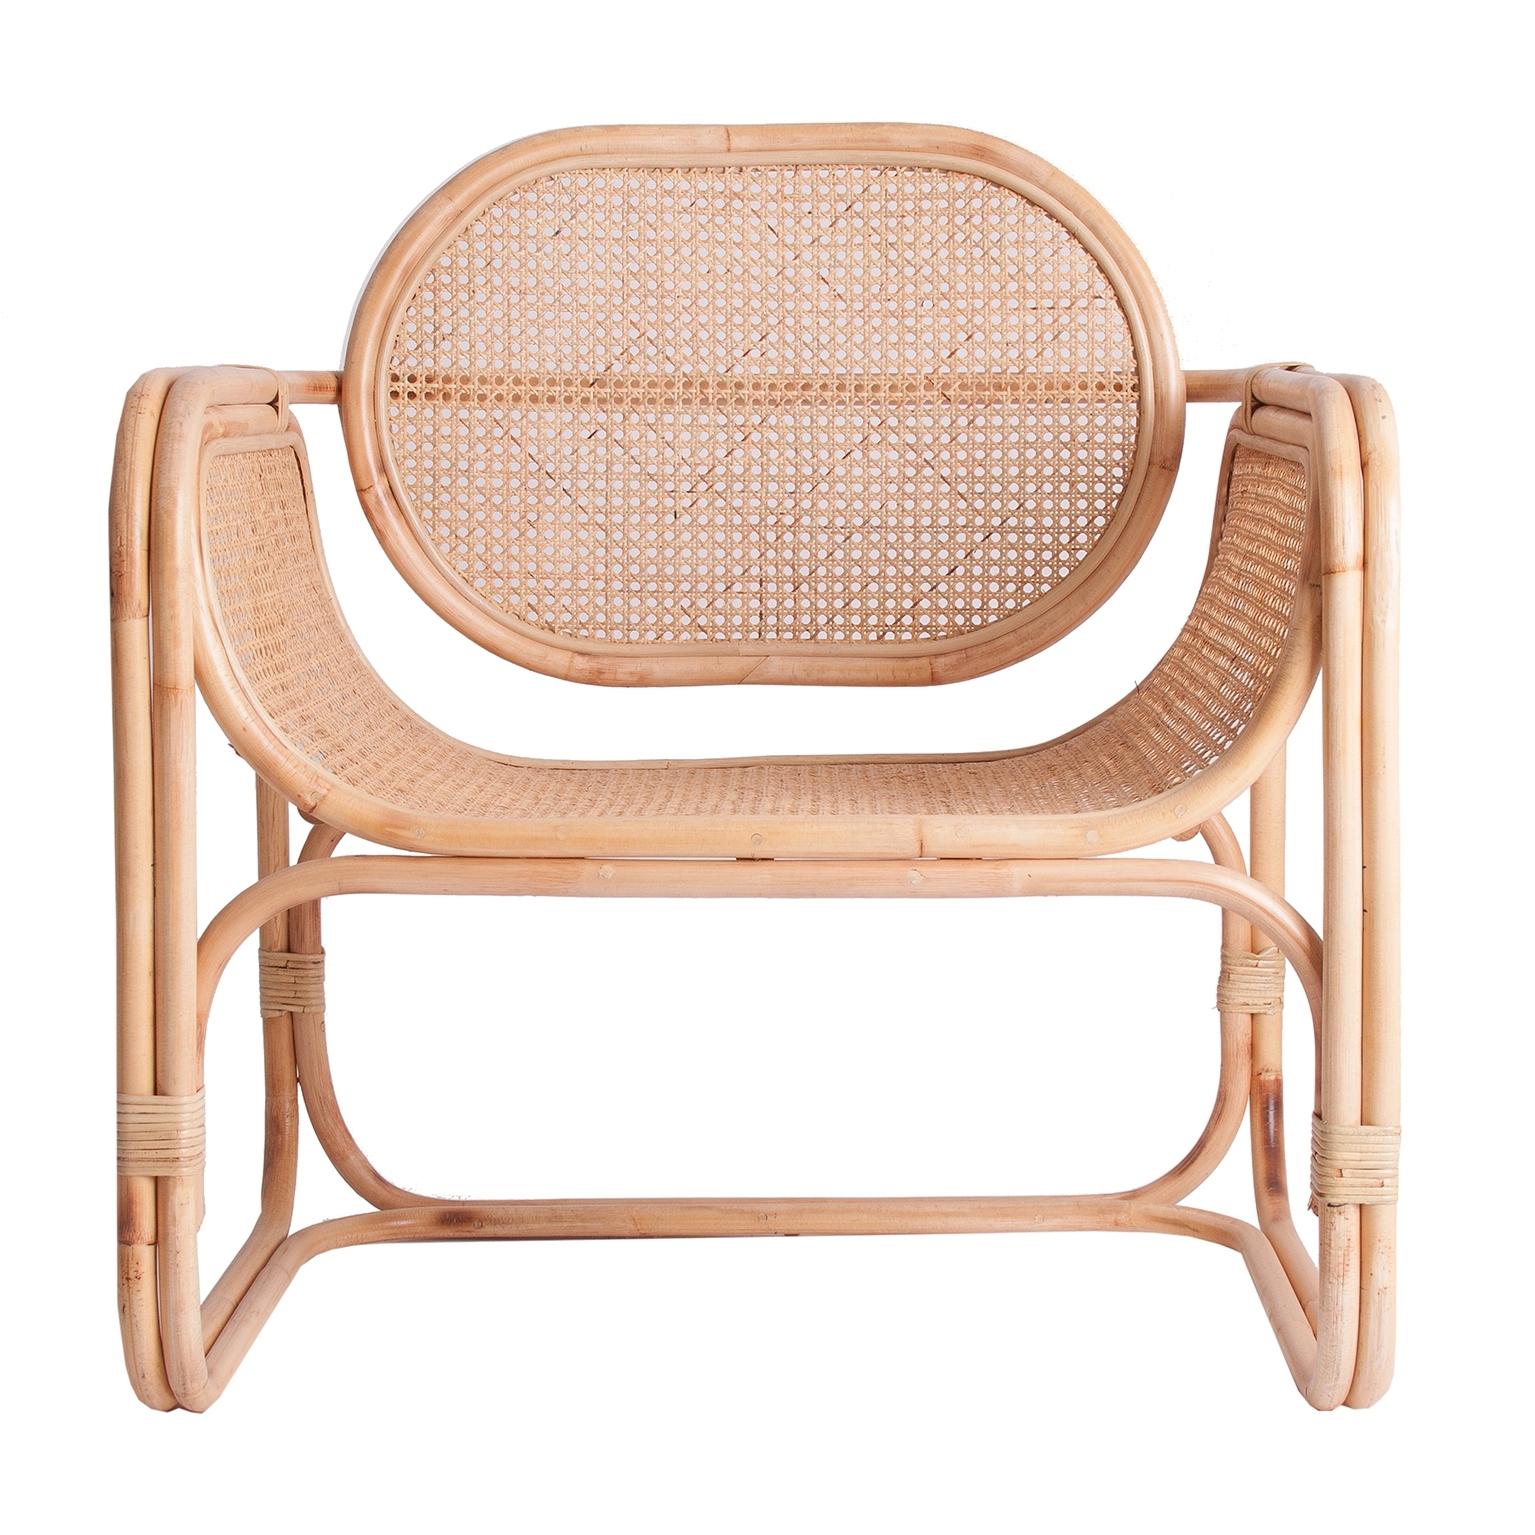 Design and original lounge armchair with cane and natural rattan airy structure.